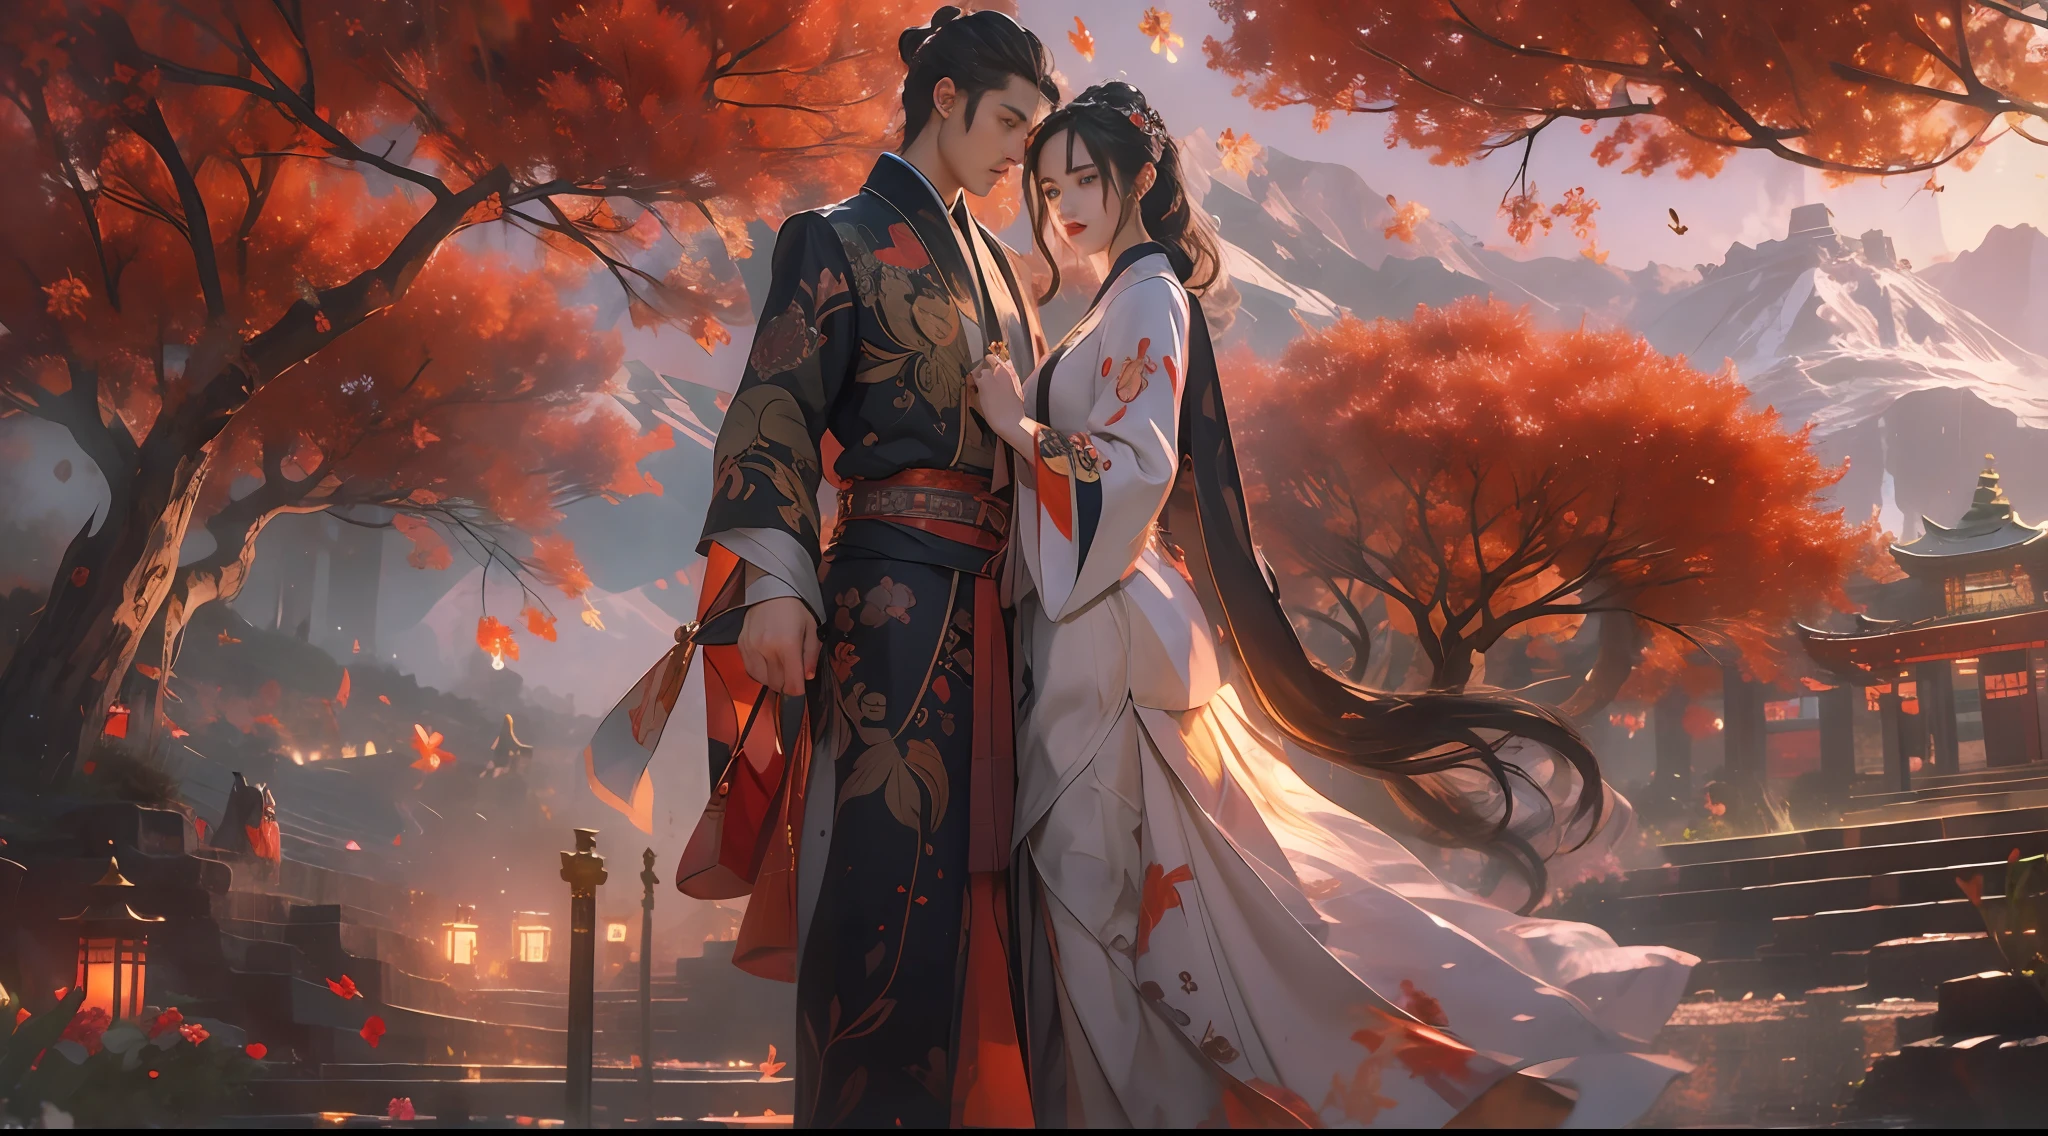 （tmasterpiece：1.2），best qualtiy，realisticlying，Tyndall effect，Underworld marriage，Spooky atmosphere，natta，Red palace lamp， The tree， scenecy， exteriors， "Young, Handsome and beautiful aristocratic couple traveling in the underworld，Detailed eyes，Clear facial features"，Japanese clothes， east asian architecture， buliding， Skysky， nigh sky， stairways，amaryllis